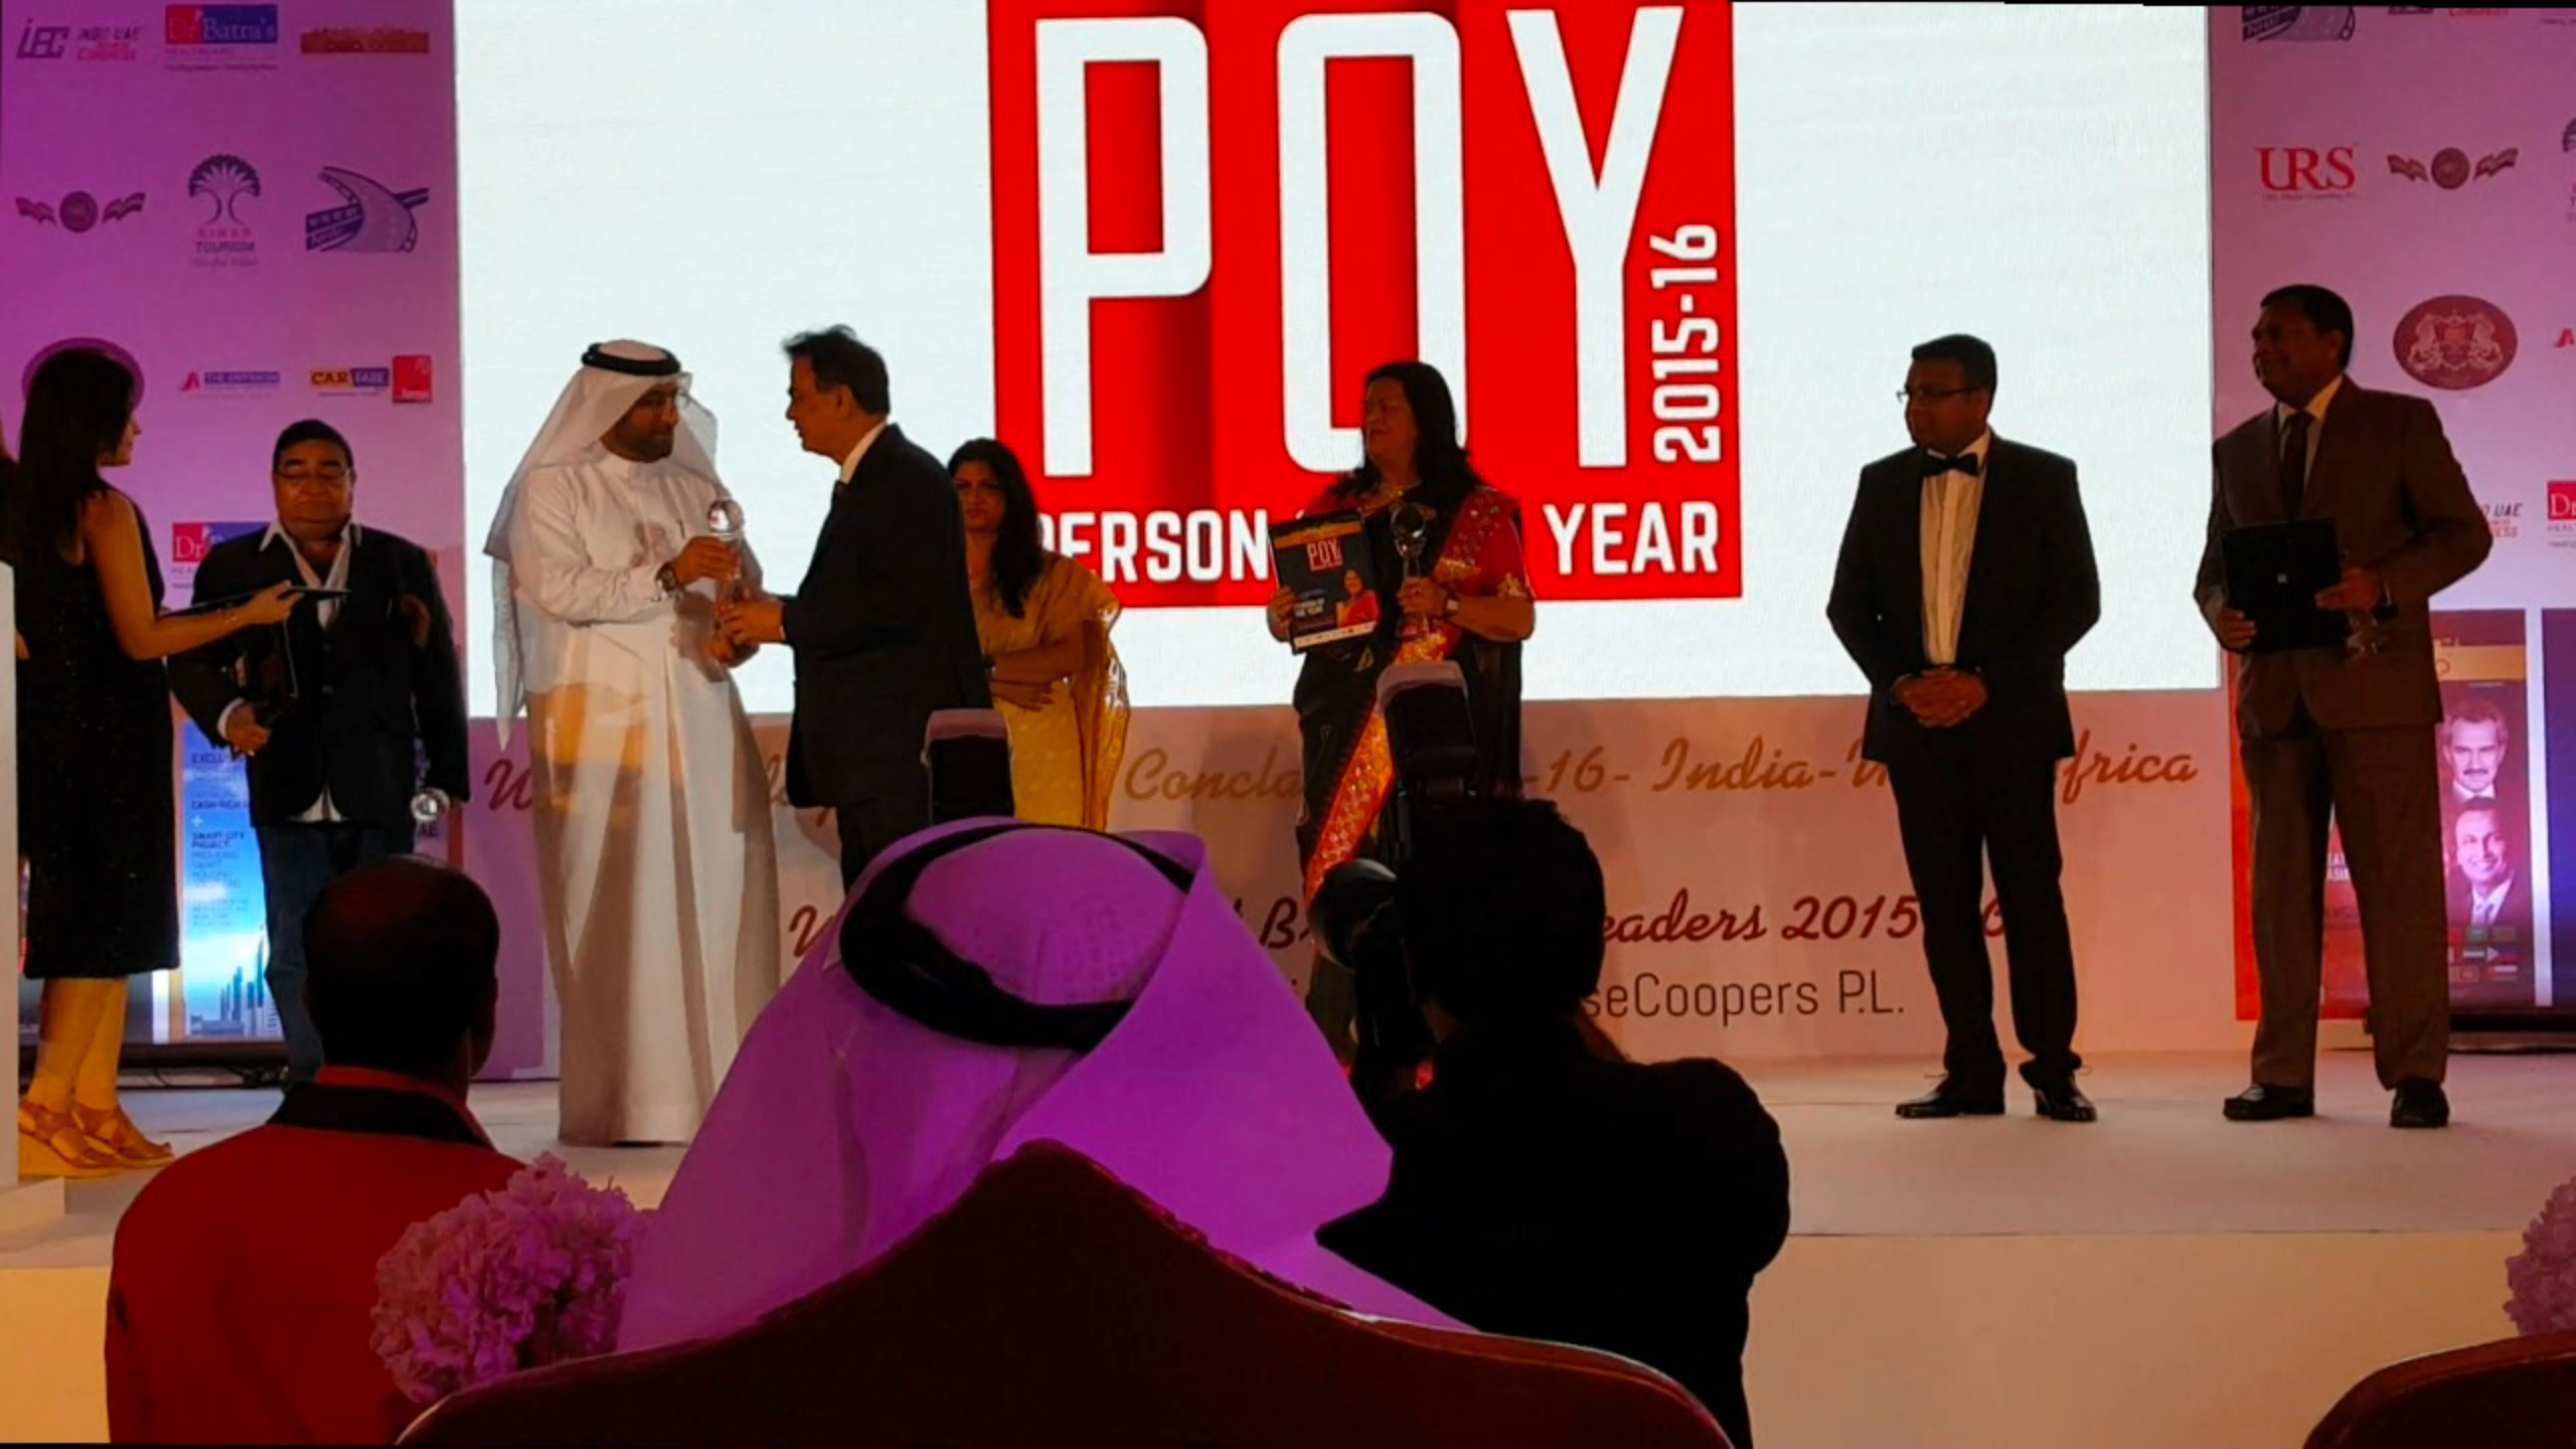 Asia One Poy Award 2015-16 - Mr. J C Chaudhry while taking the award